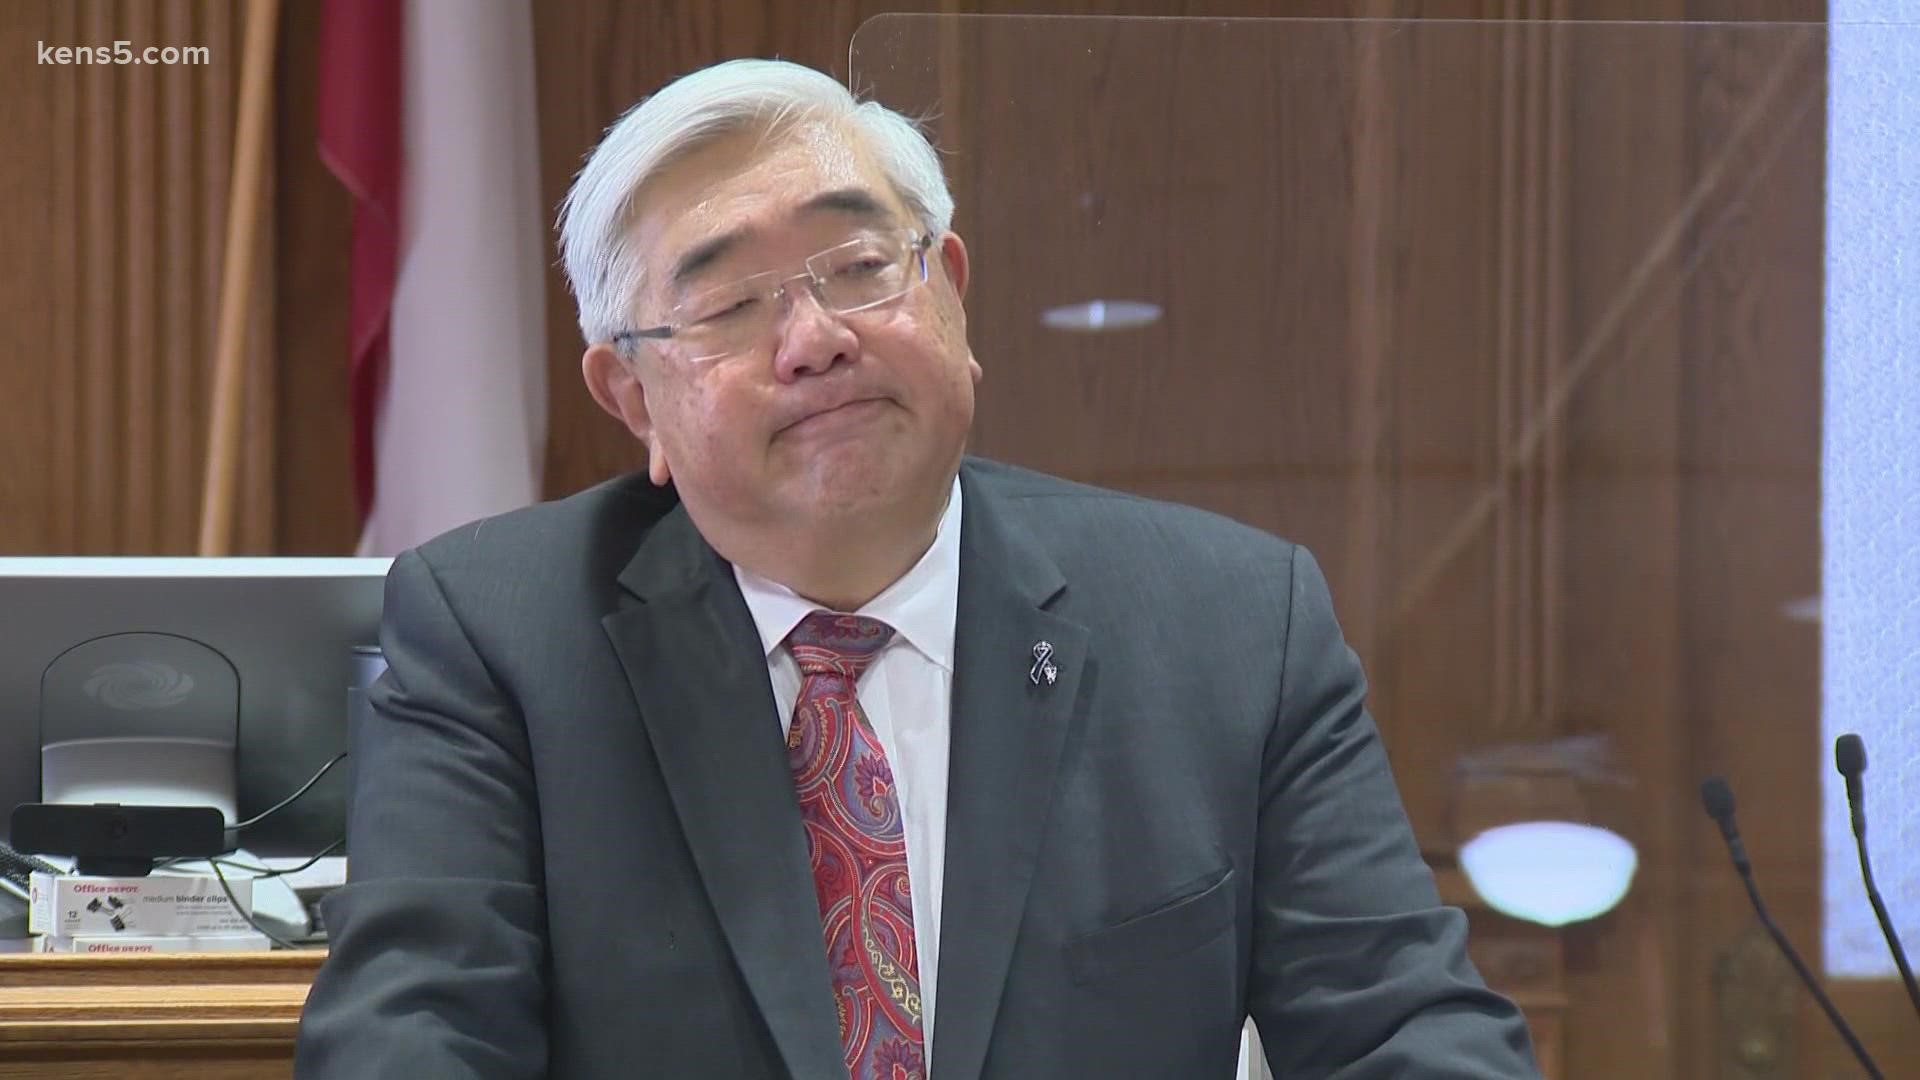 After nearly 16 years serving as a district court judge in Bexar County, Judge Peter Sakai announced he is 
resigning.